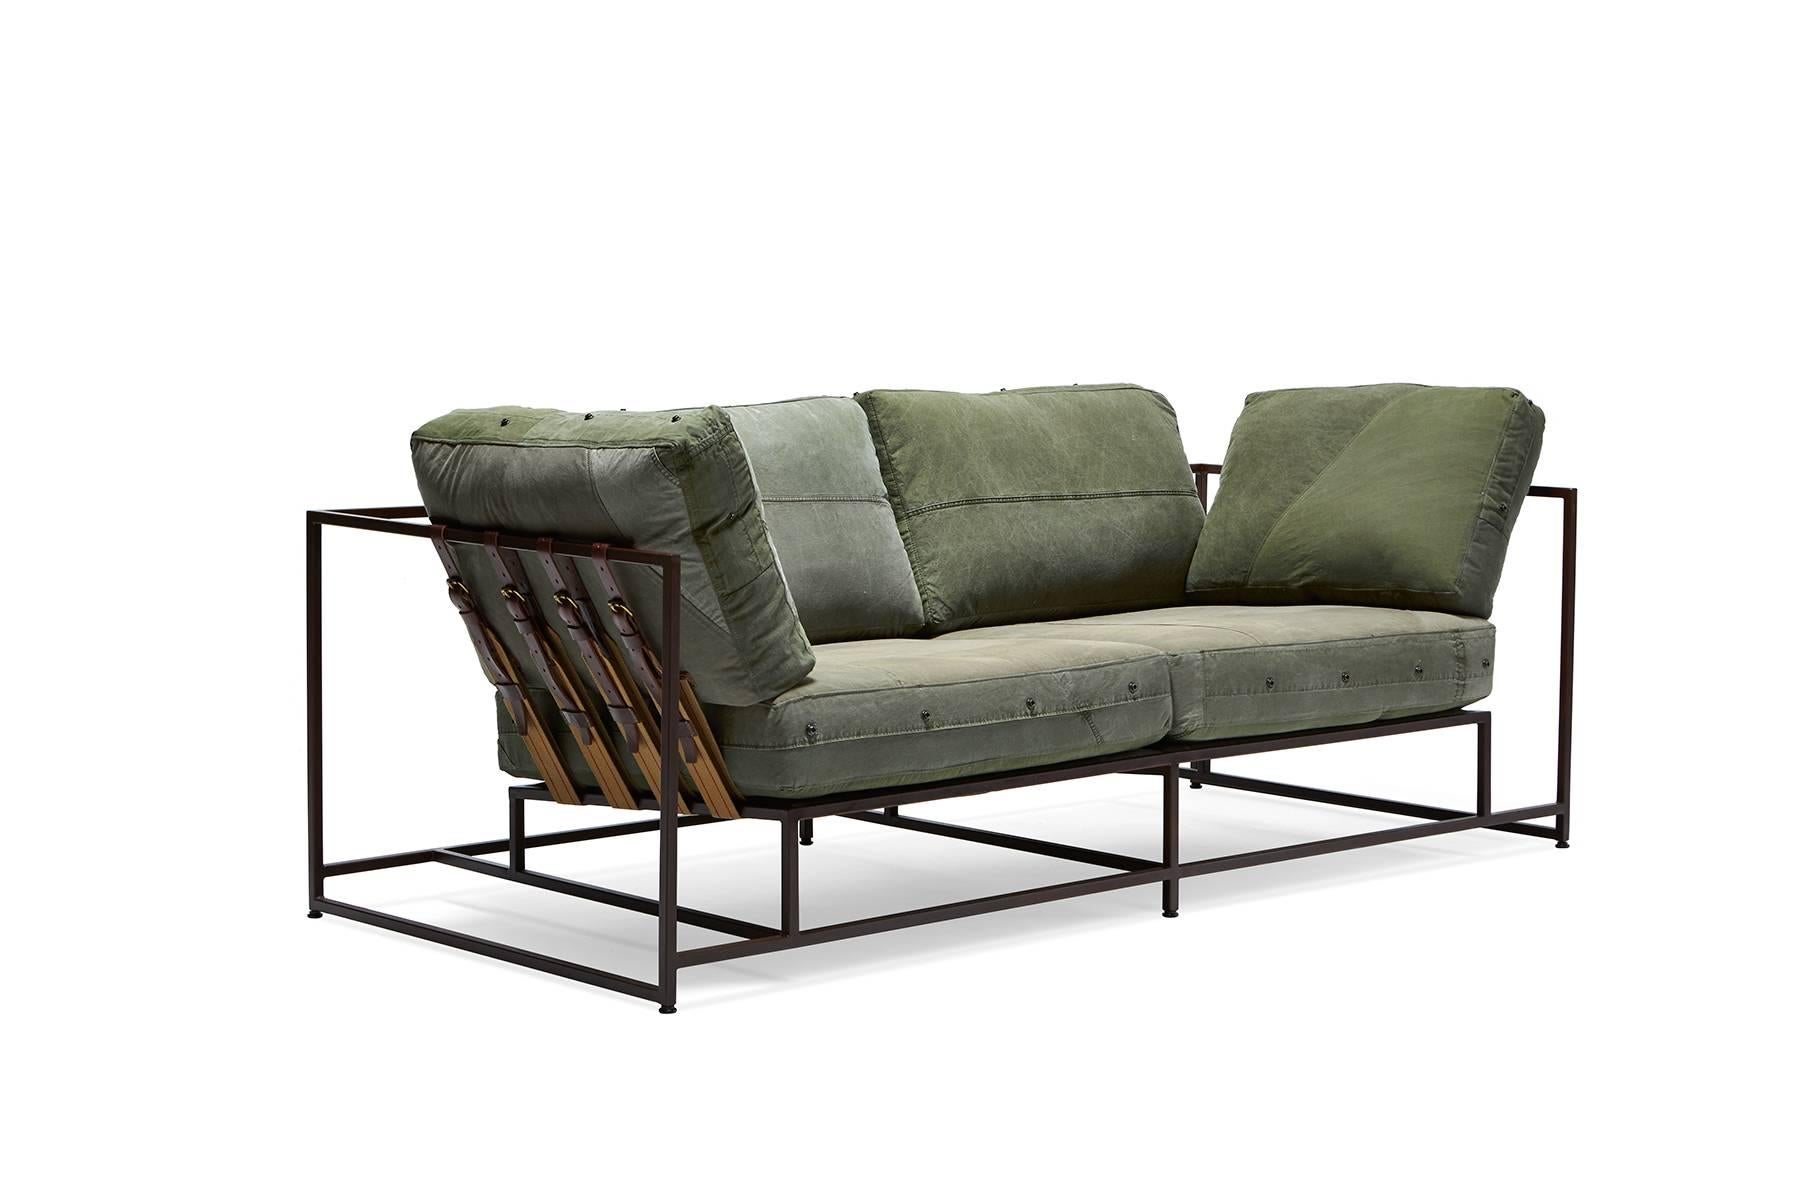 
The Inheritance Two Seat Sofa by Stephen Kenn is as comfortable as it is unique. The design features an exposed construction composed of three elements - a steel frame, plush upholstery, and supportive belts. The deep seating area is perfect for a